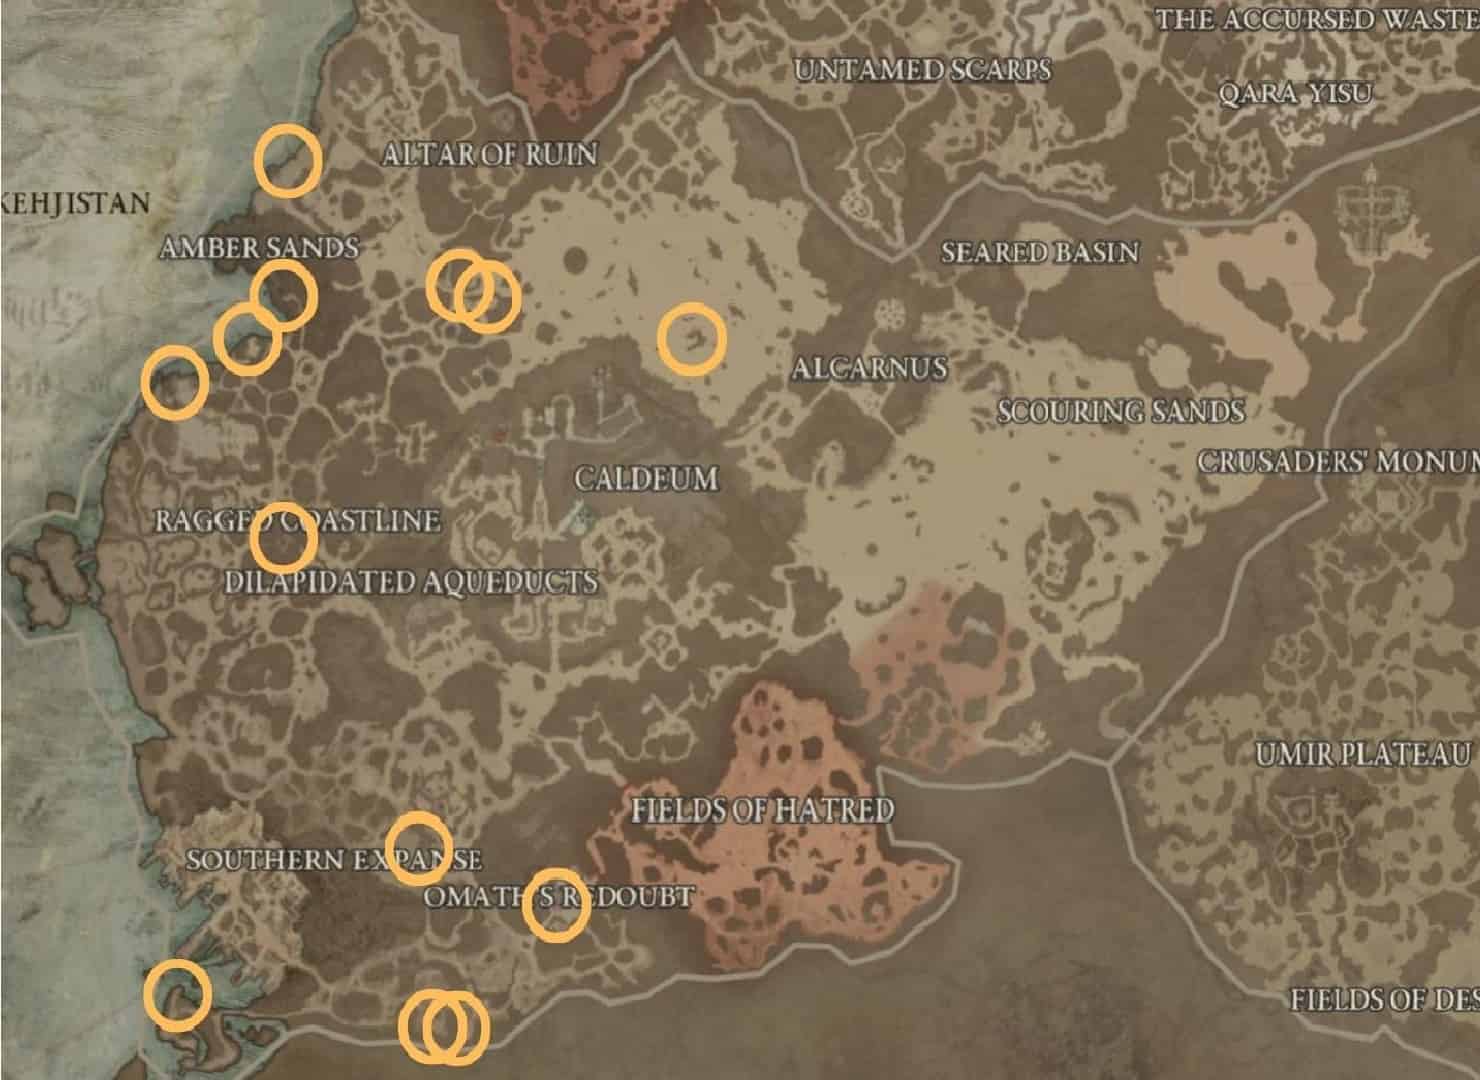 Diablo 4 mystery chest locations: An image of an in-game map with the potential Tortured Gift of Mystery chest spawn locations in Kehjistan.